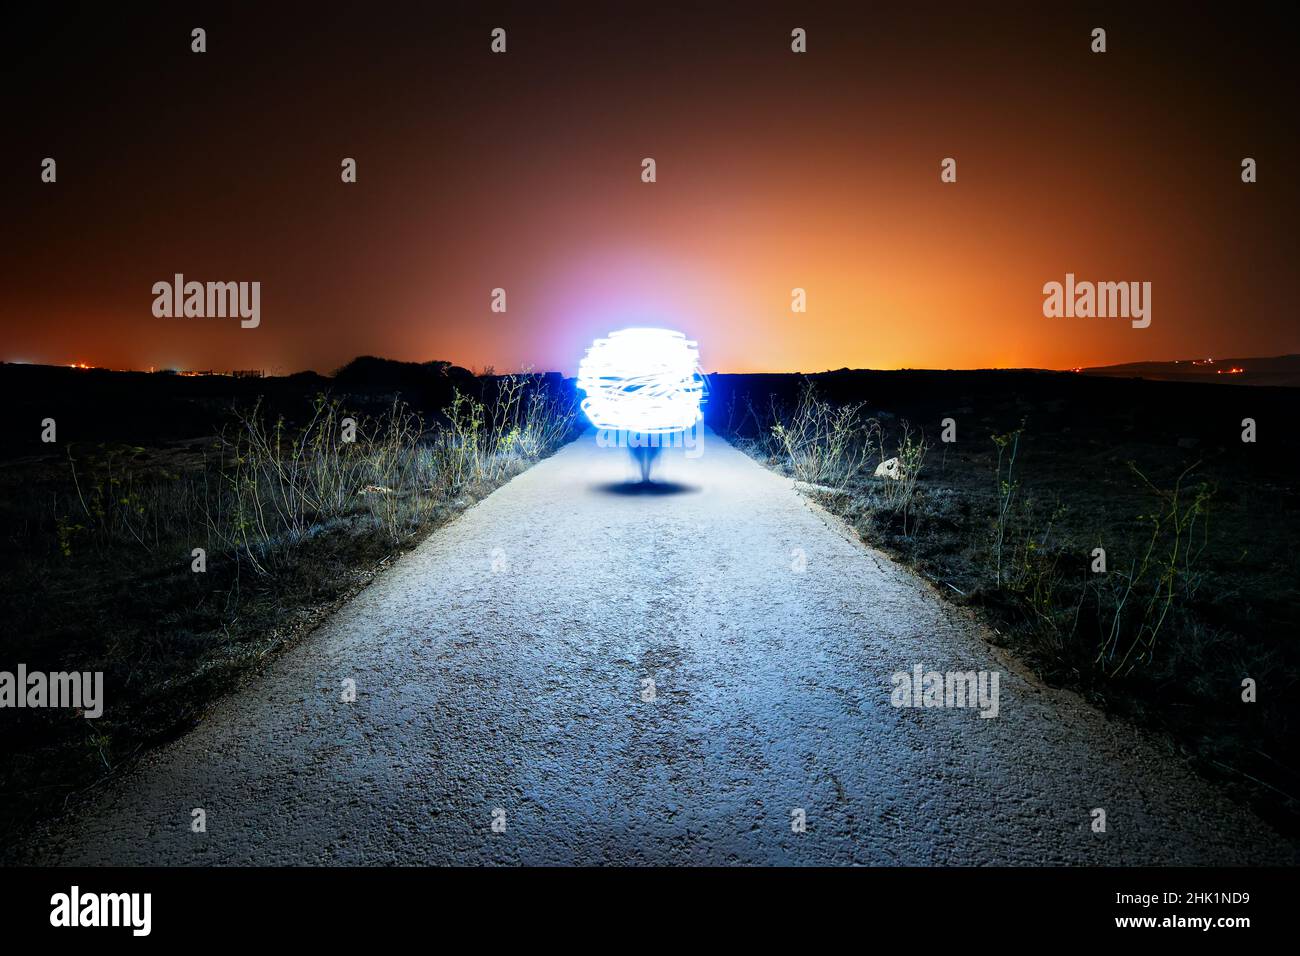 Orb like spaceship lands on a lone country road Stock Photo